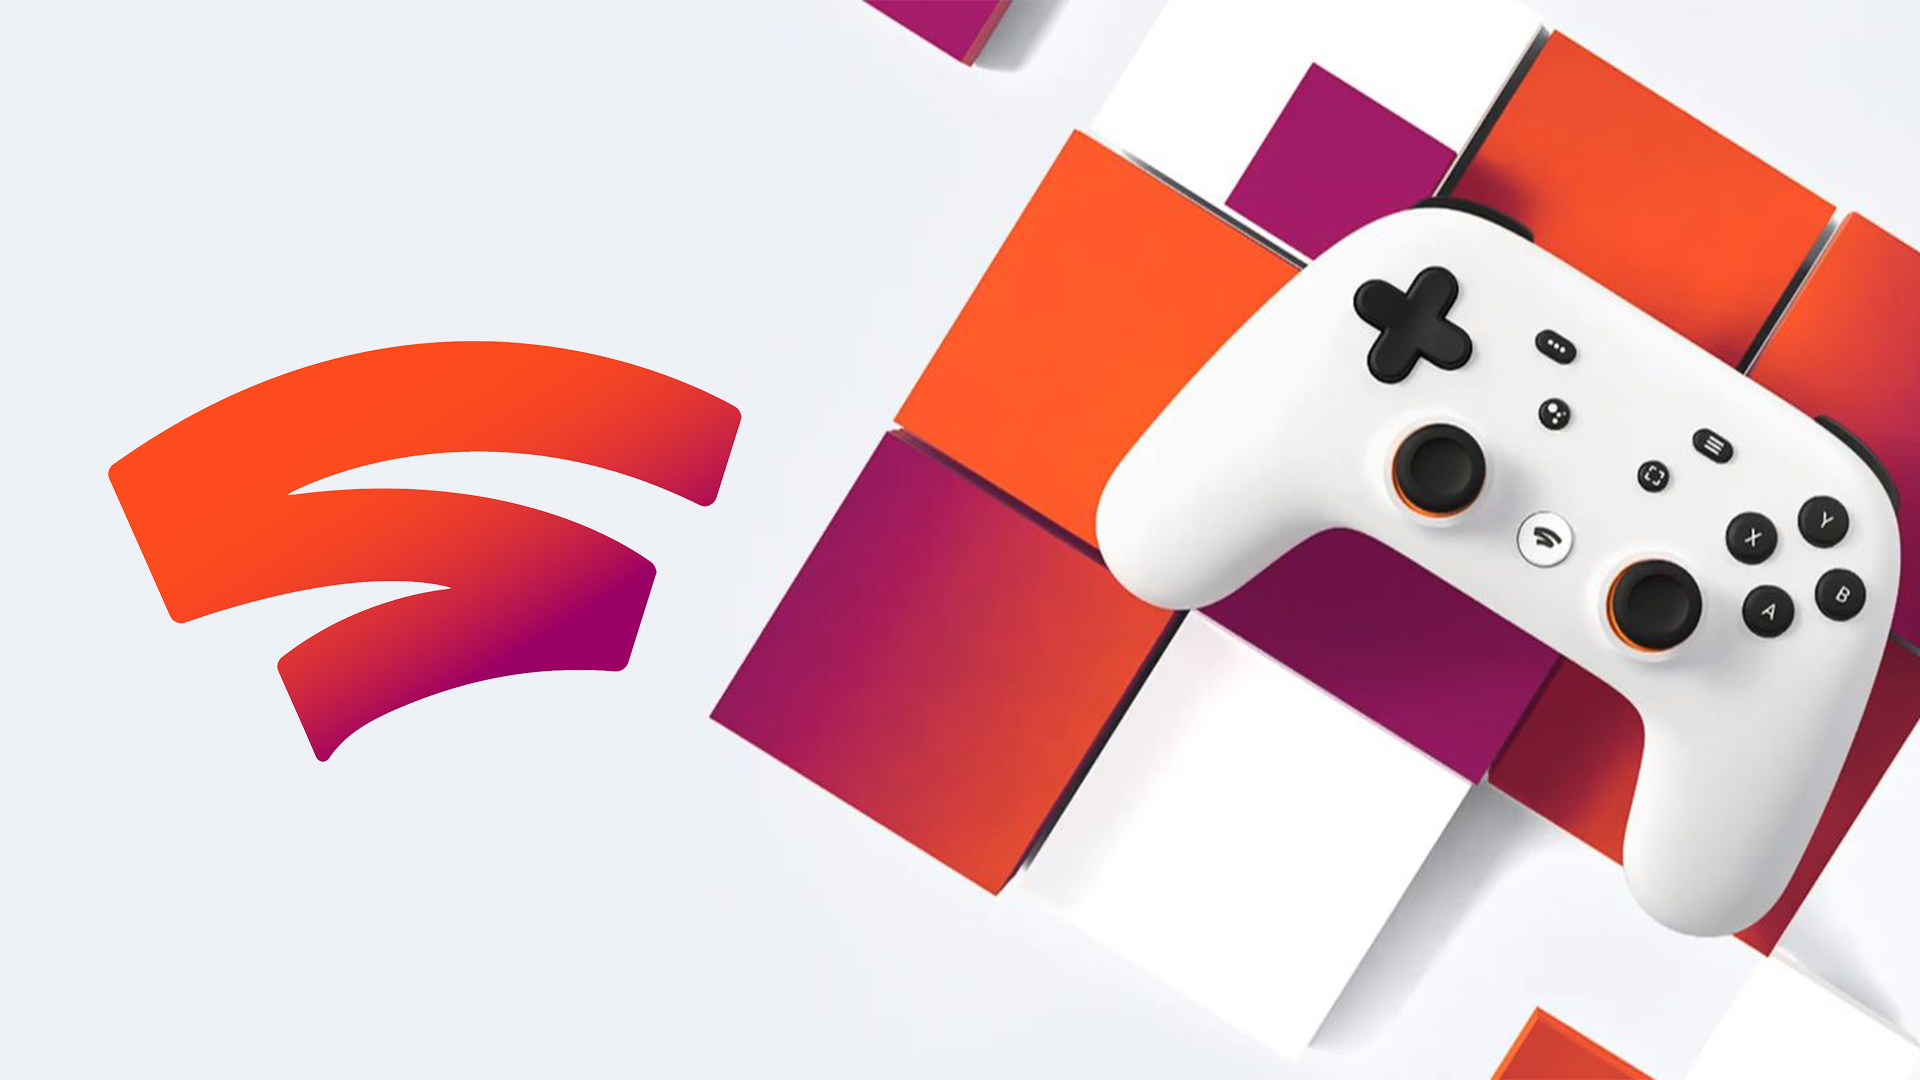 Google Is Said to Have Downgraded Stadia